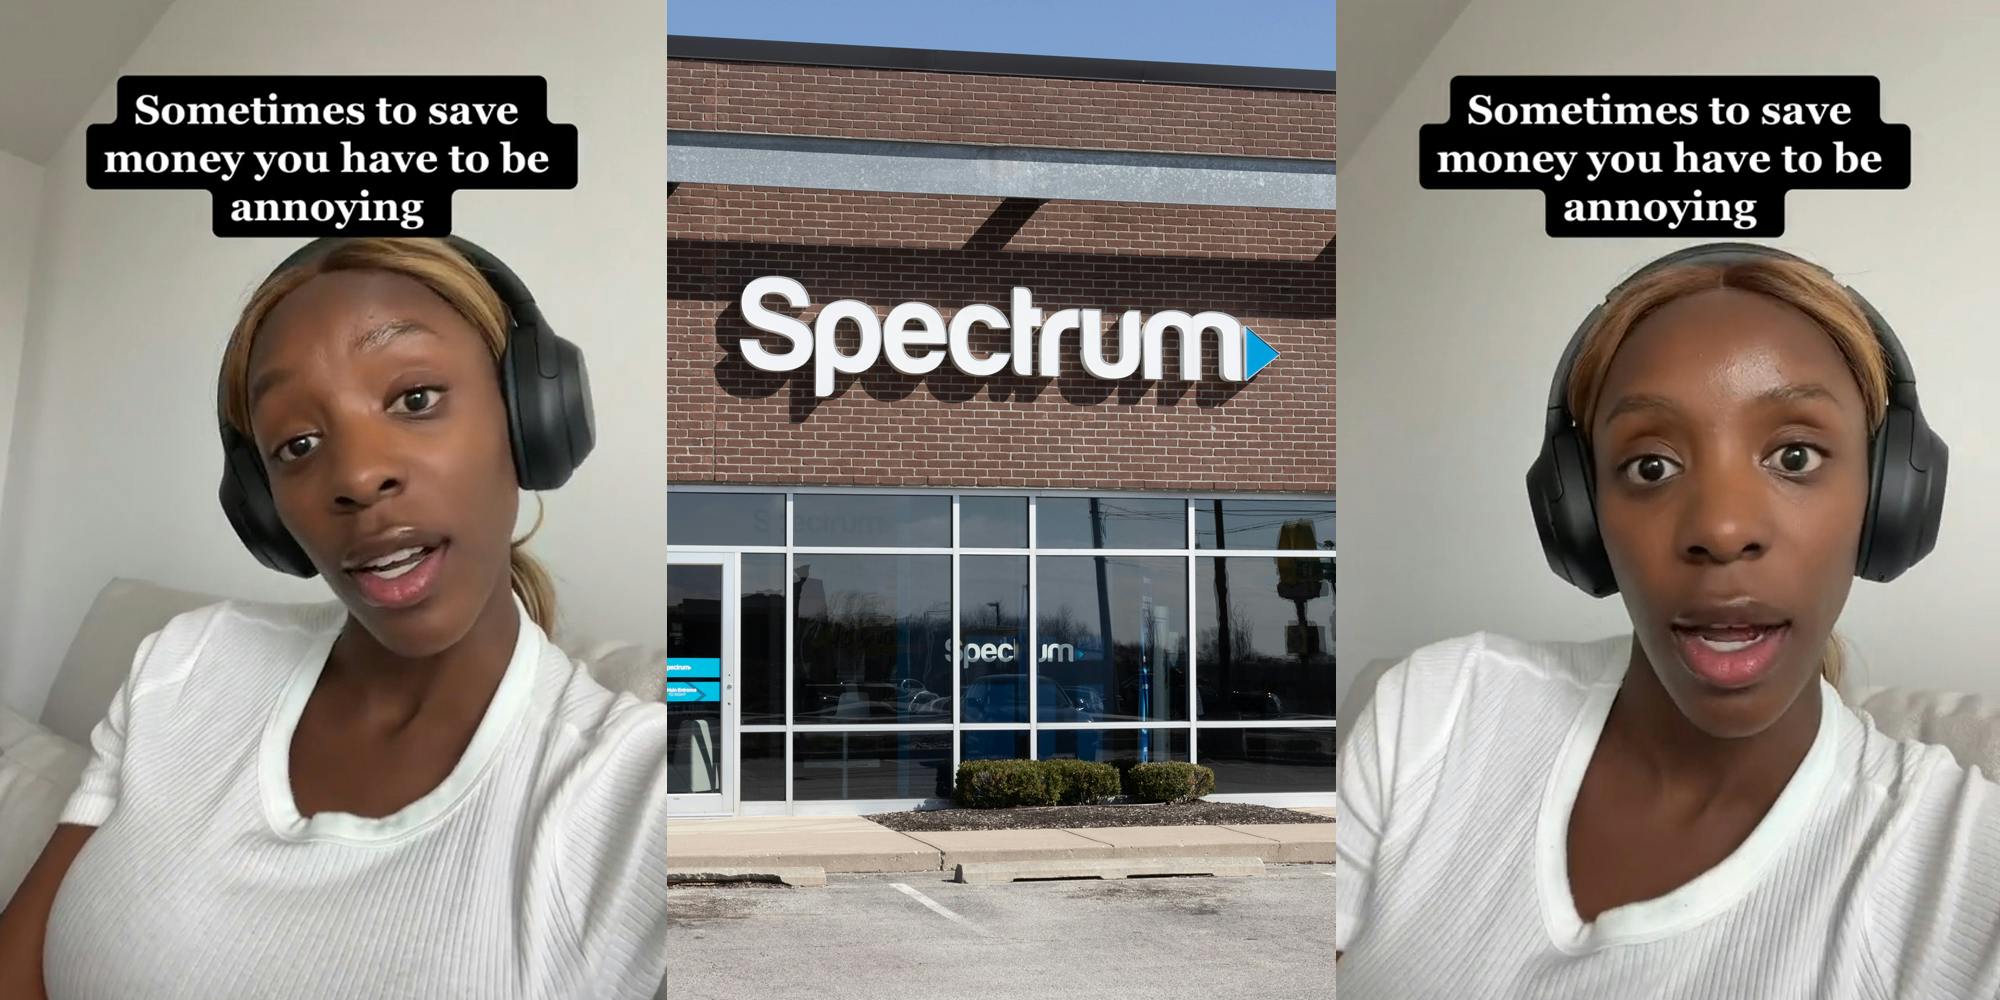 Spectrum customer speaking with caption "Sometimes to save money you have to be annoying" (l) Spectrum sign on building (c) Spectrum customer speaking with caption "Sometimes to save money you have to be annoying" (r)